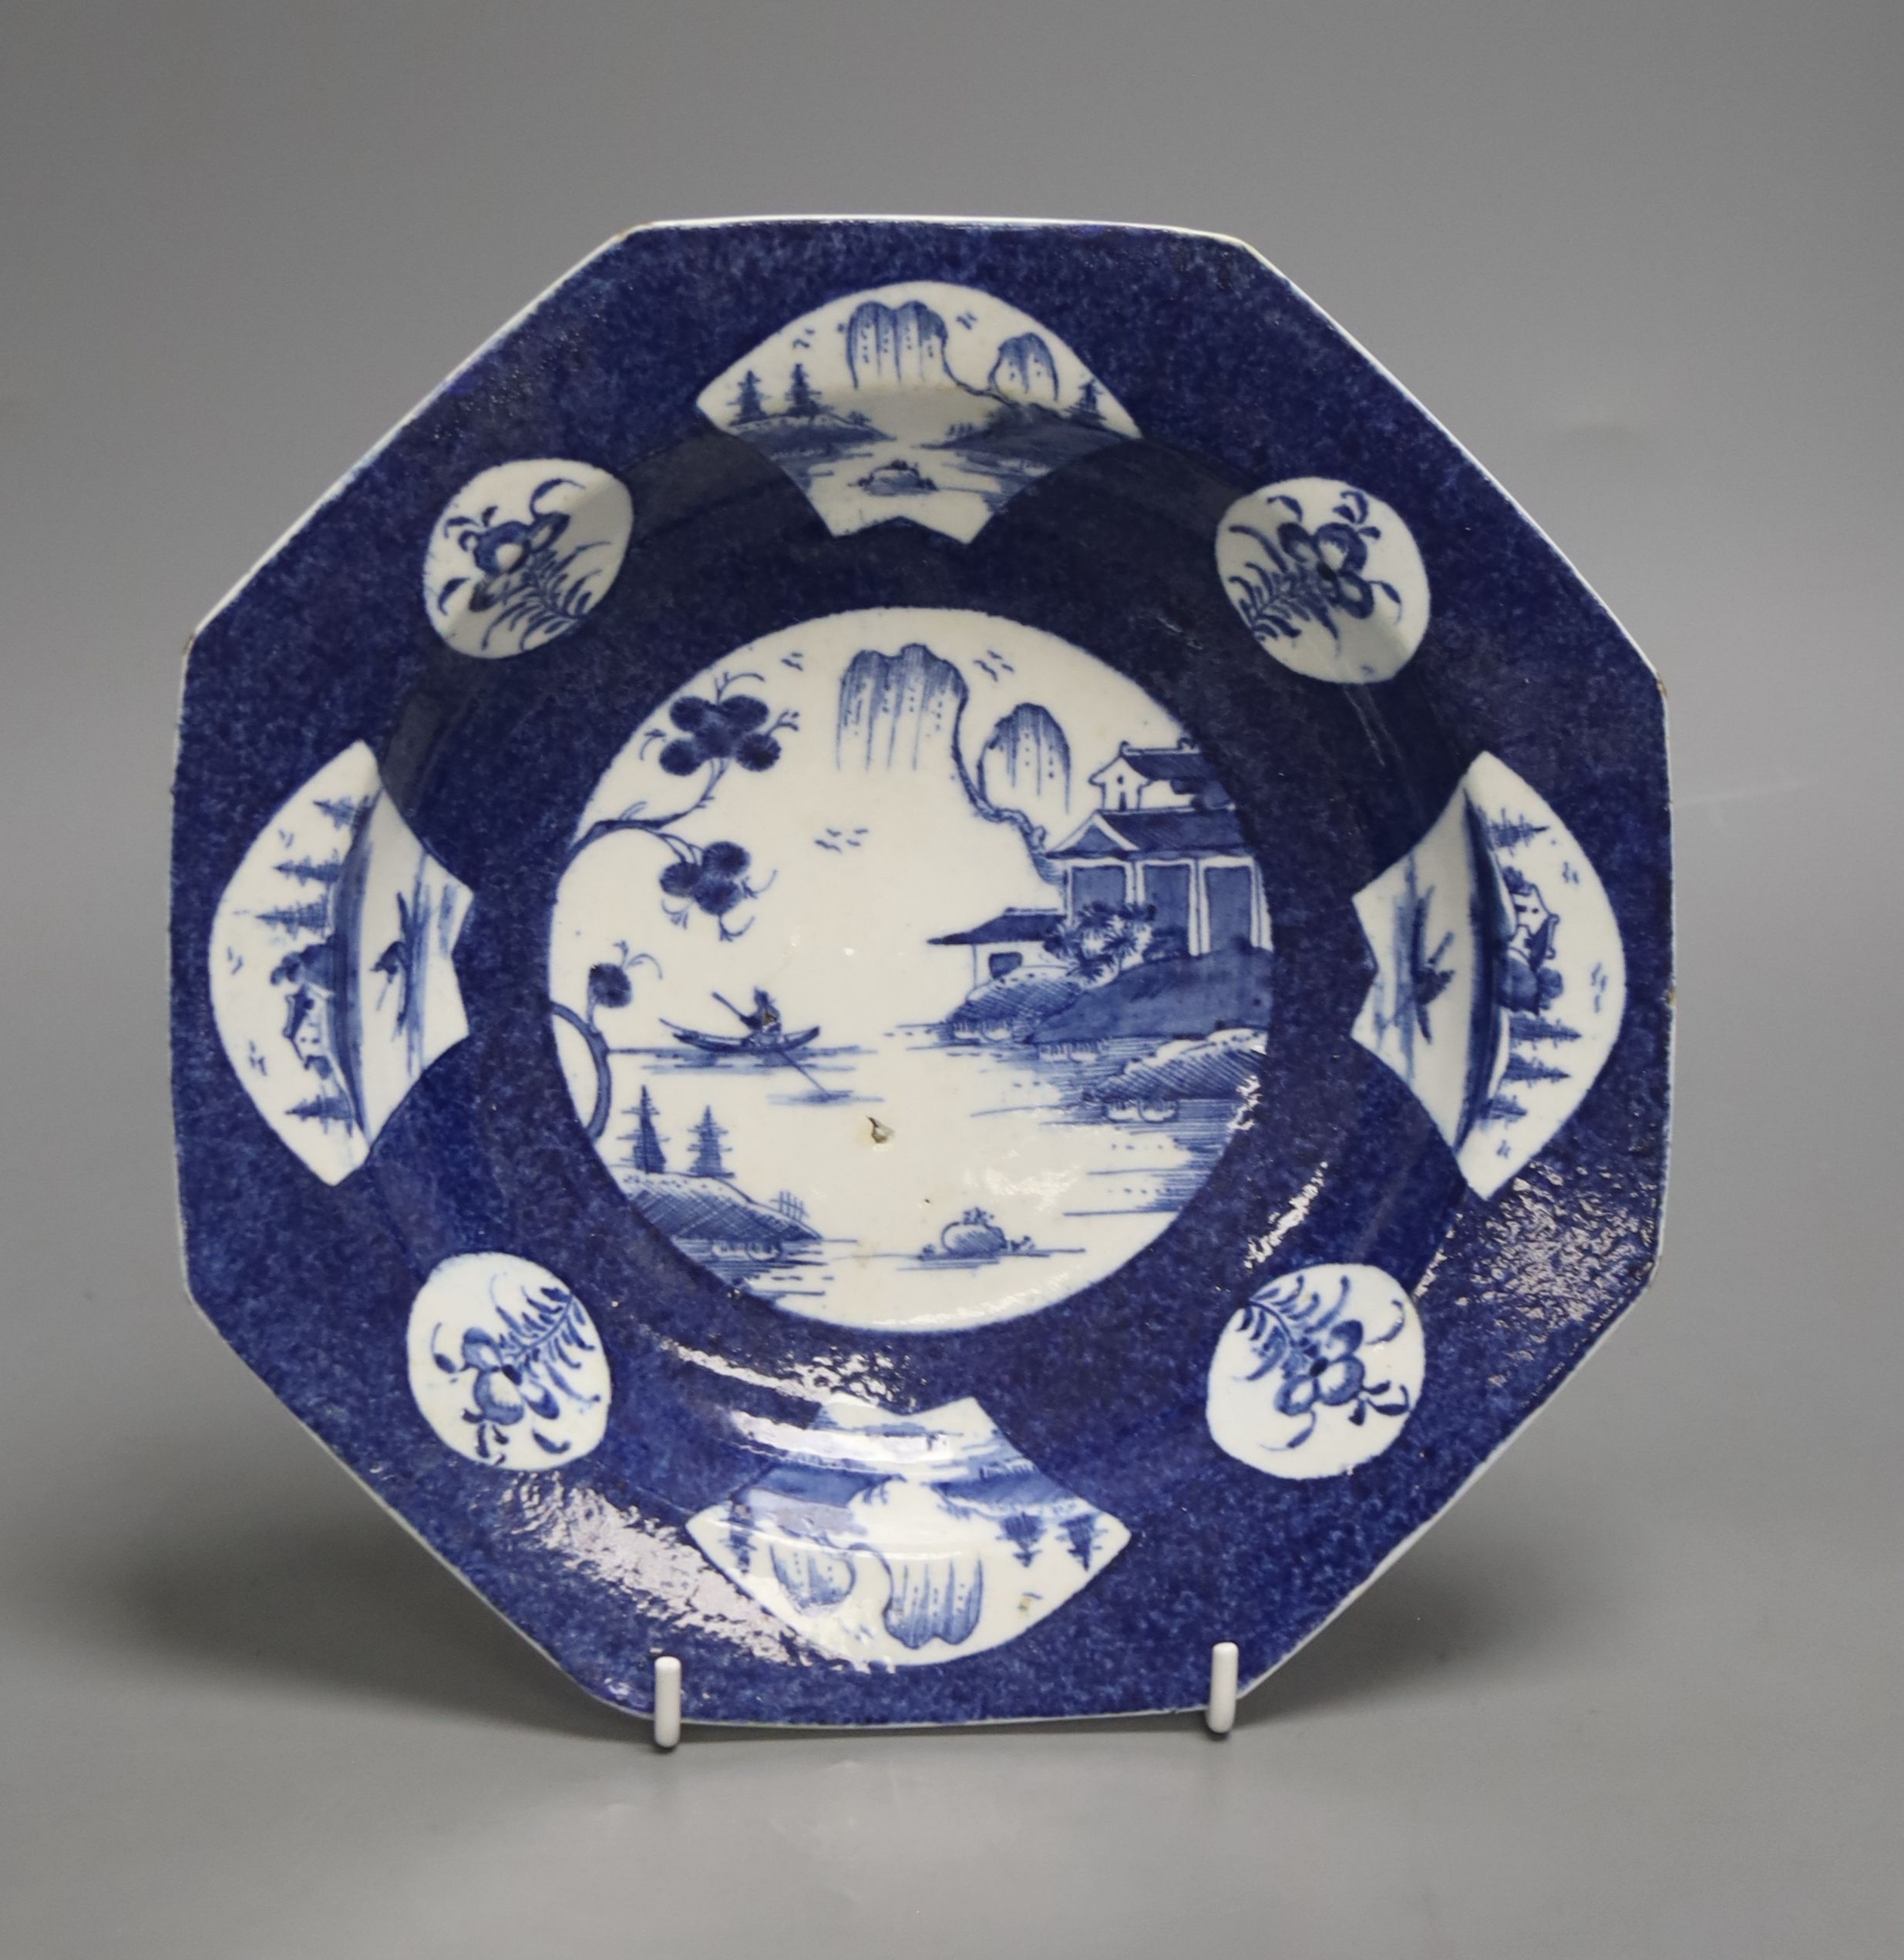 A Bow octagonal plate, painted with landscapes on a blue ground, c.1757, six character mark, 22cm across